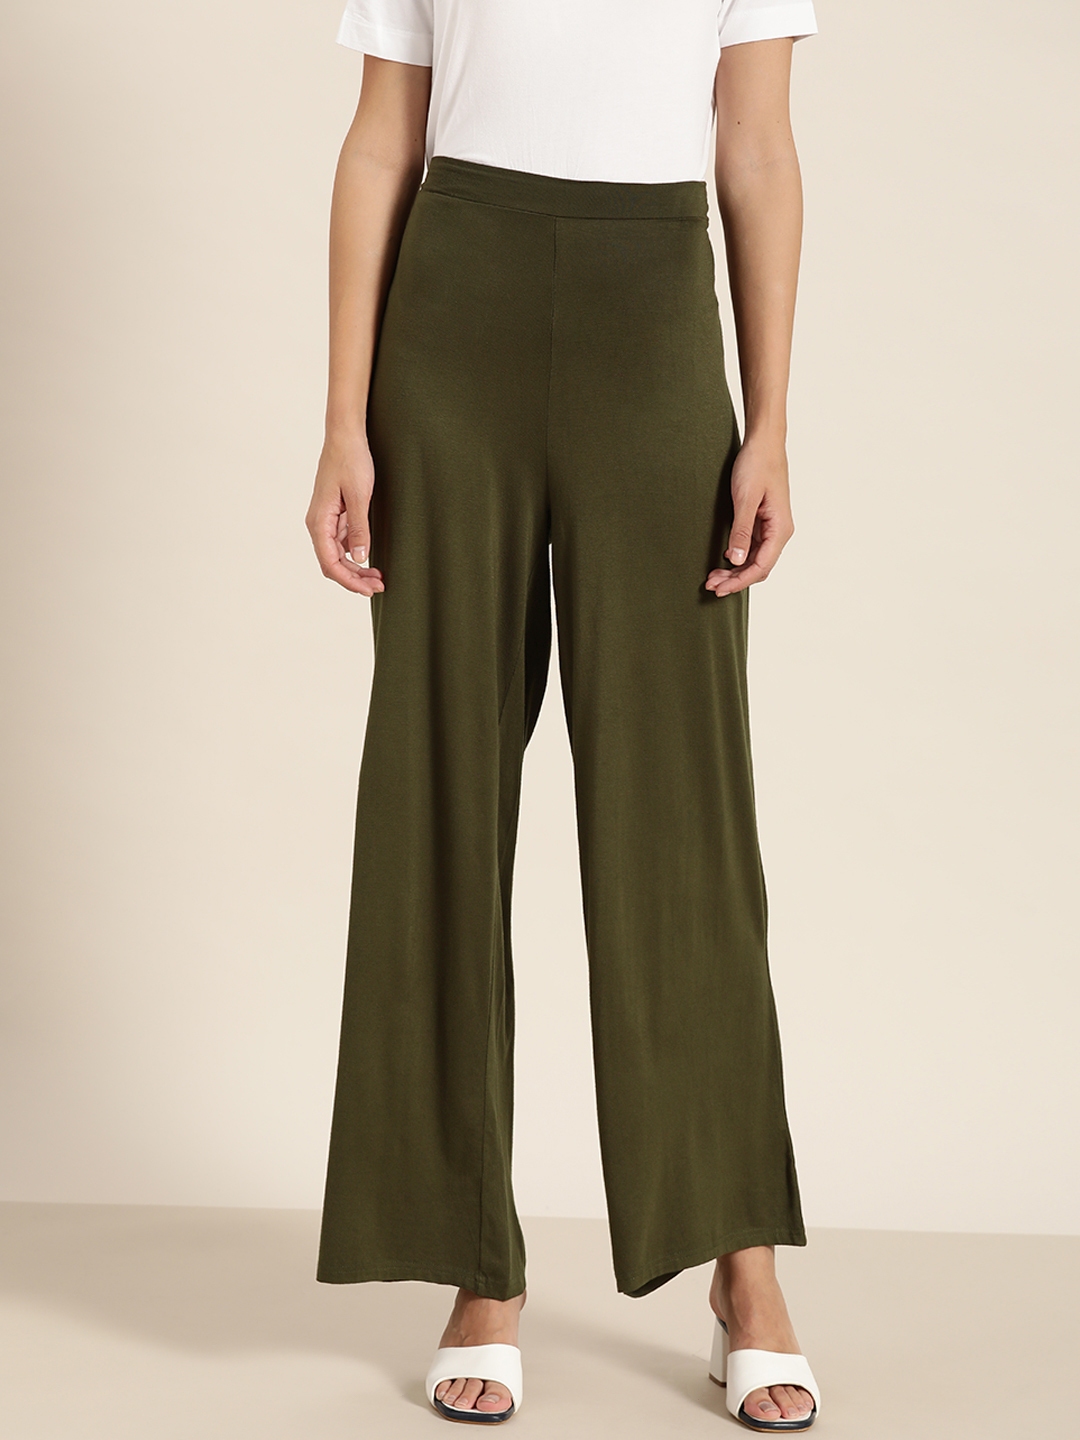 Buy Her By Invictus Women Olive Green High Rise Parallel Trousers ...